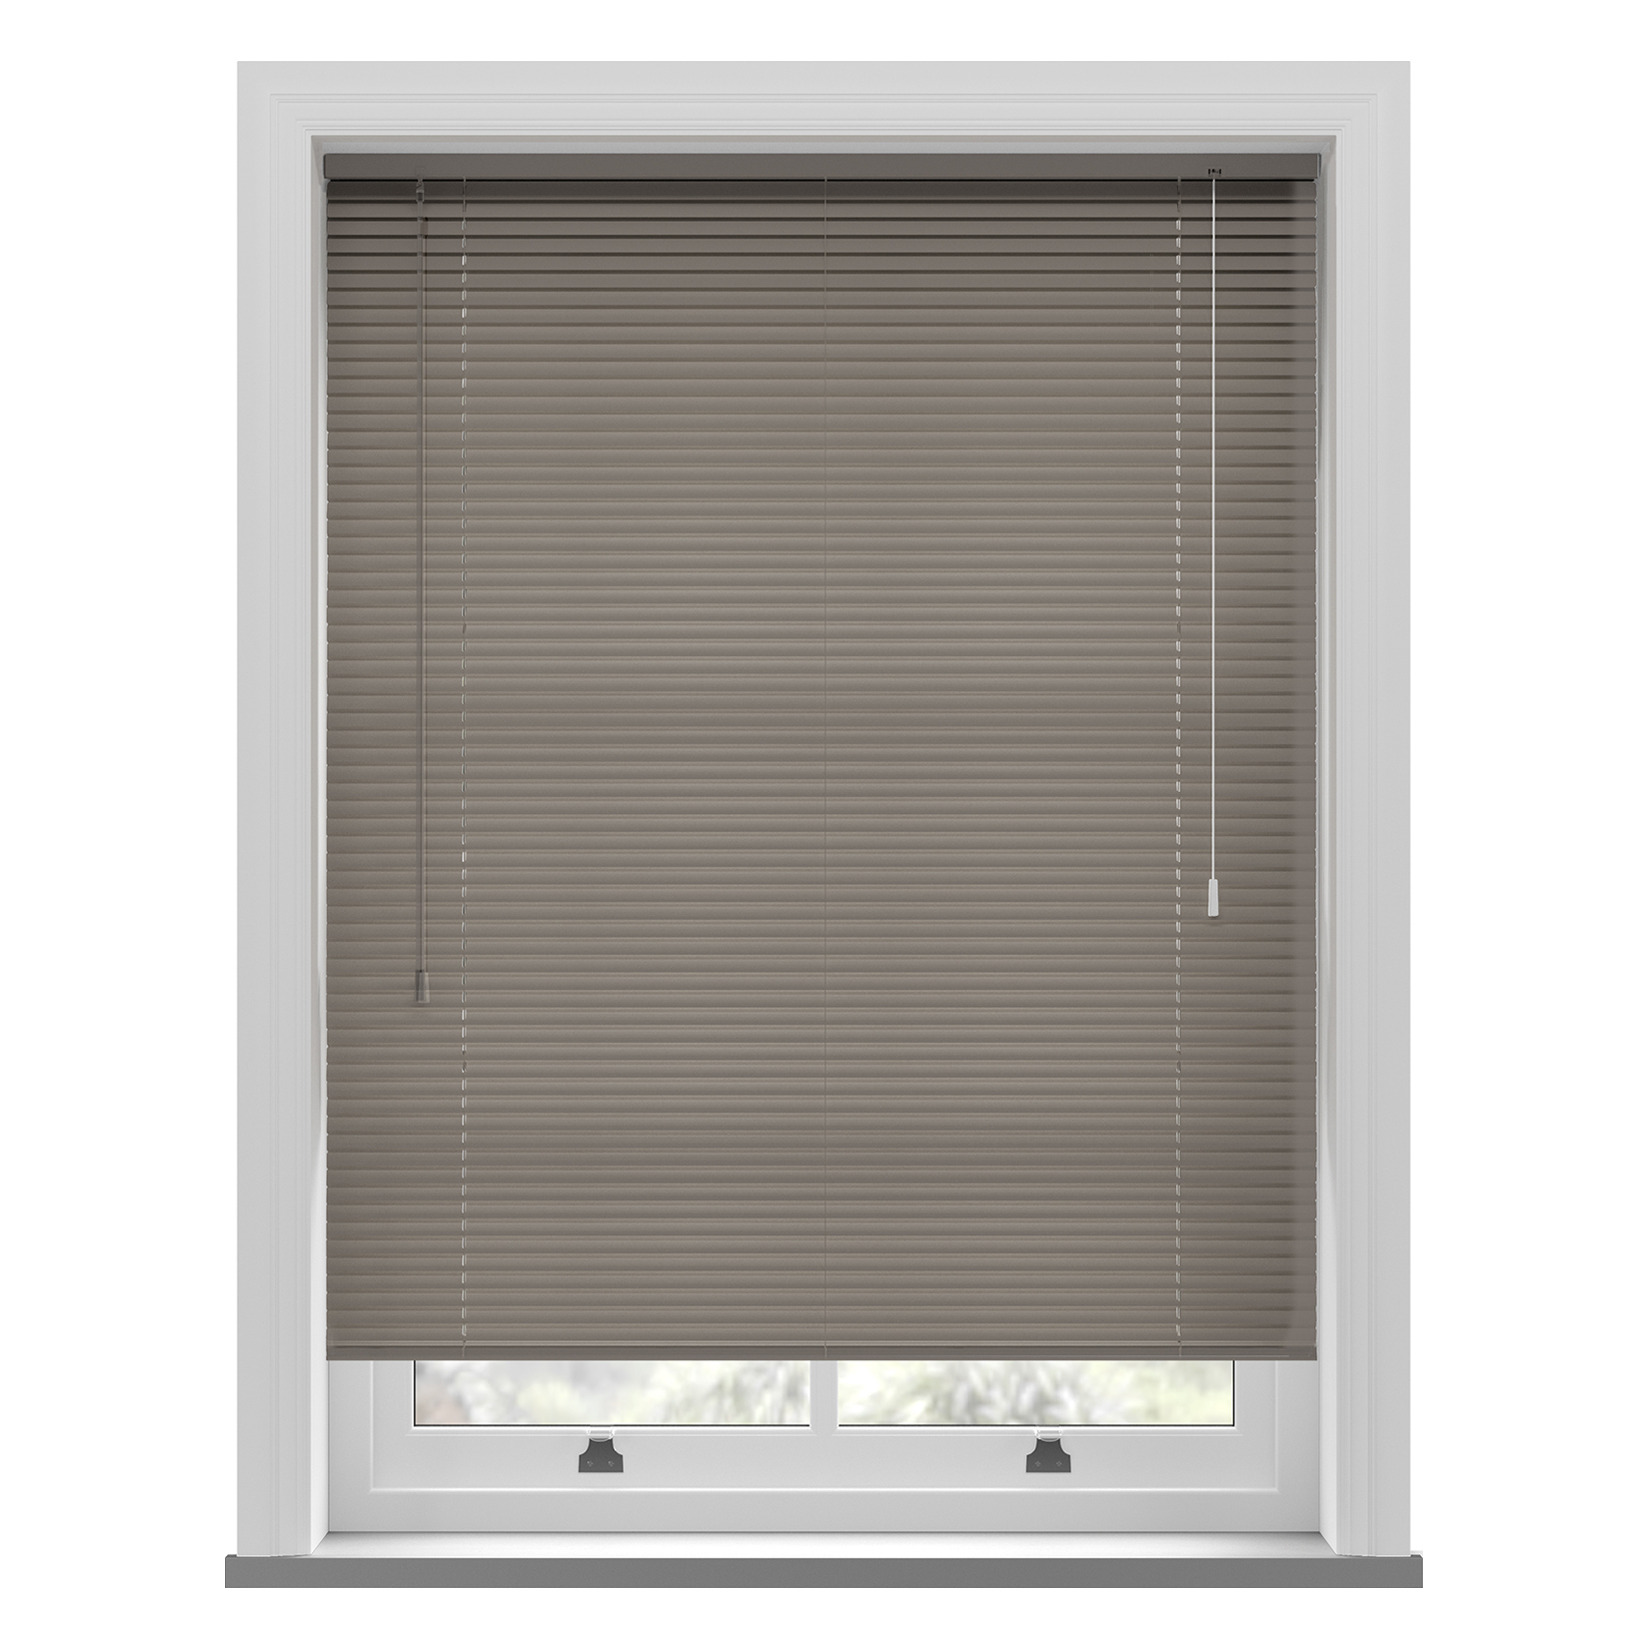 Turin 25mm Striped Taupe - image 1